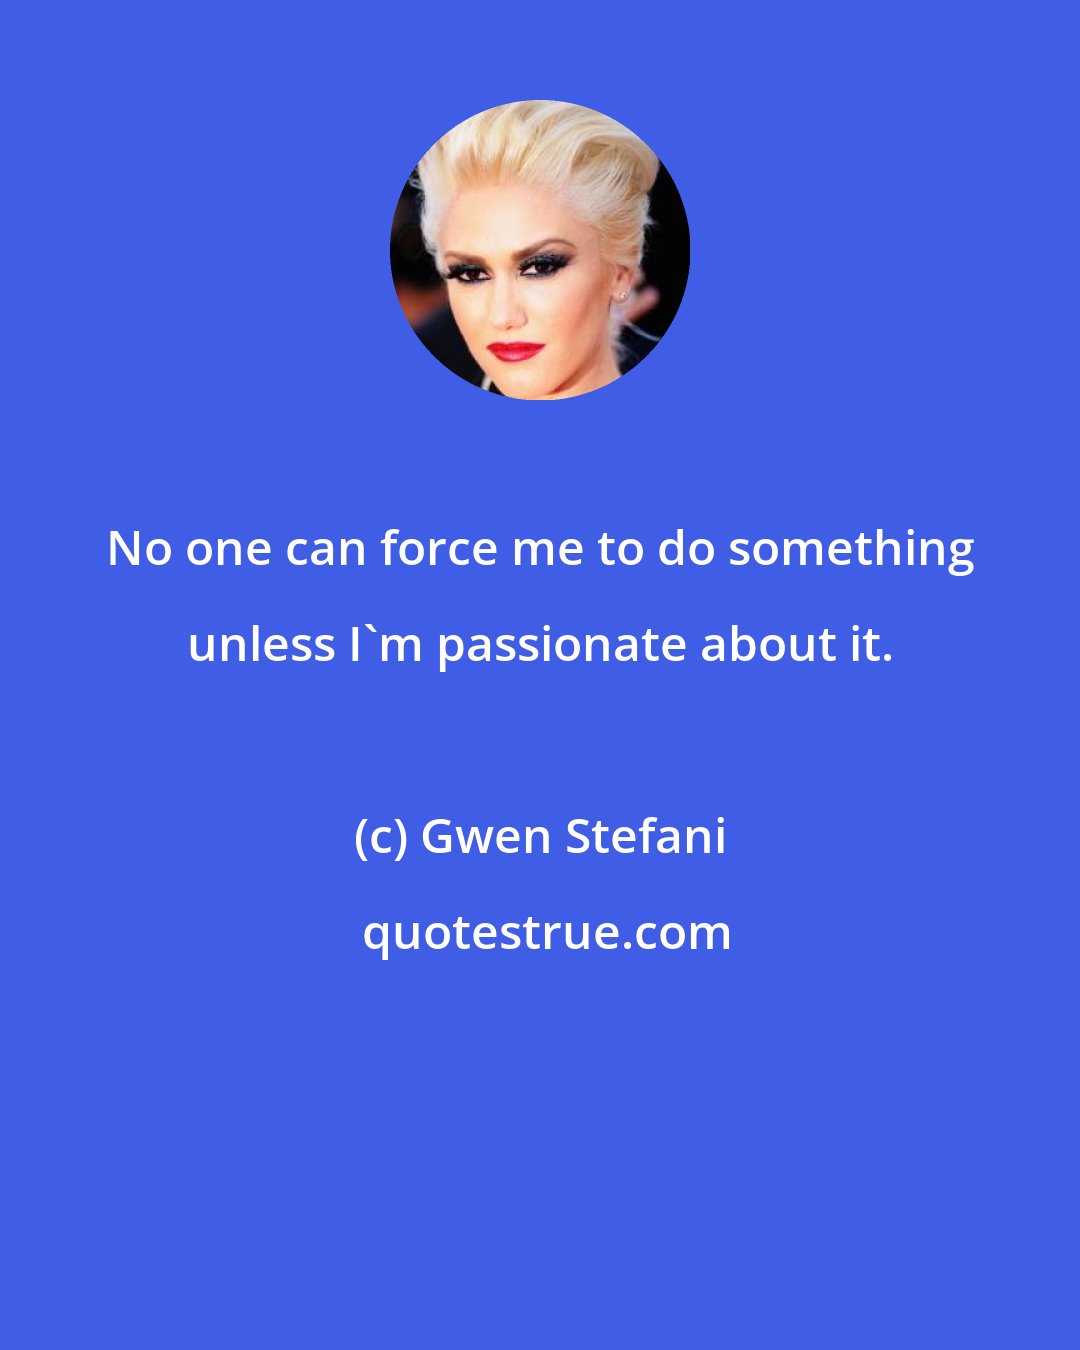 Gwen Stefani: No one can force me to do something unless I'm passionate about it.